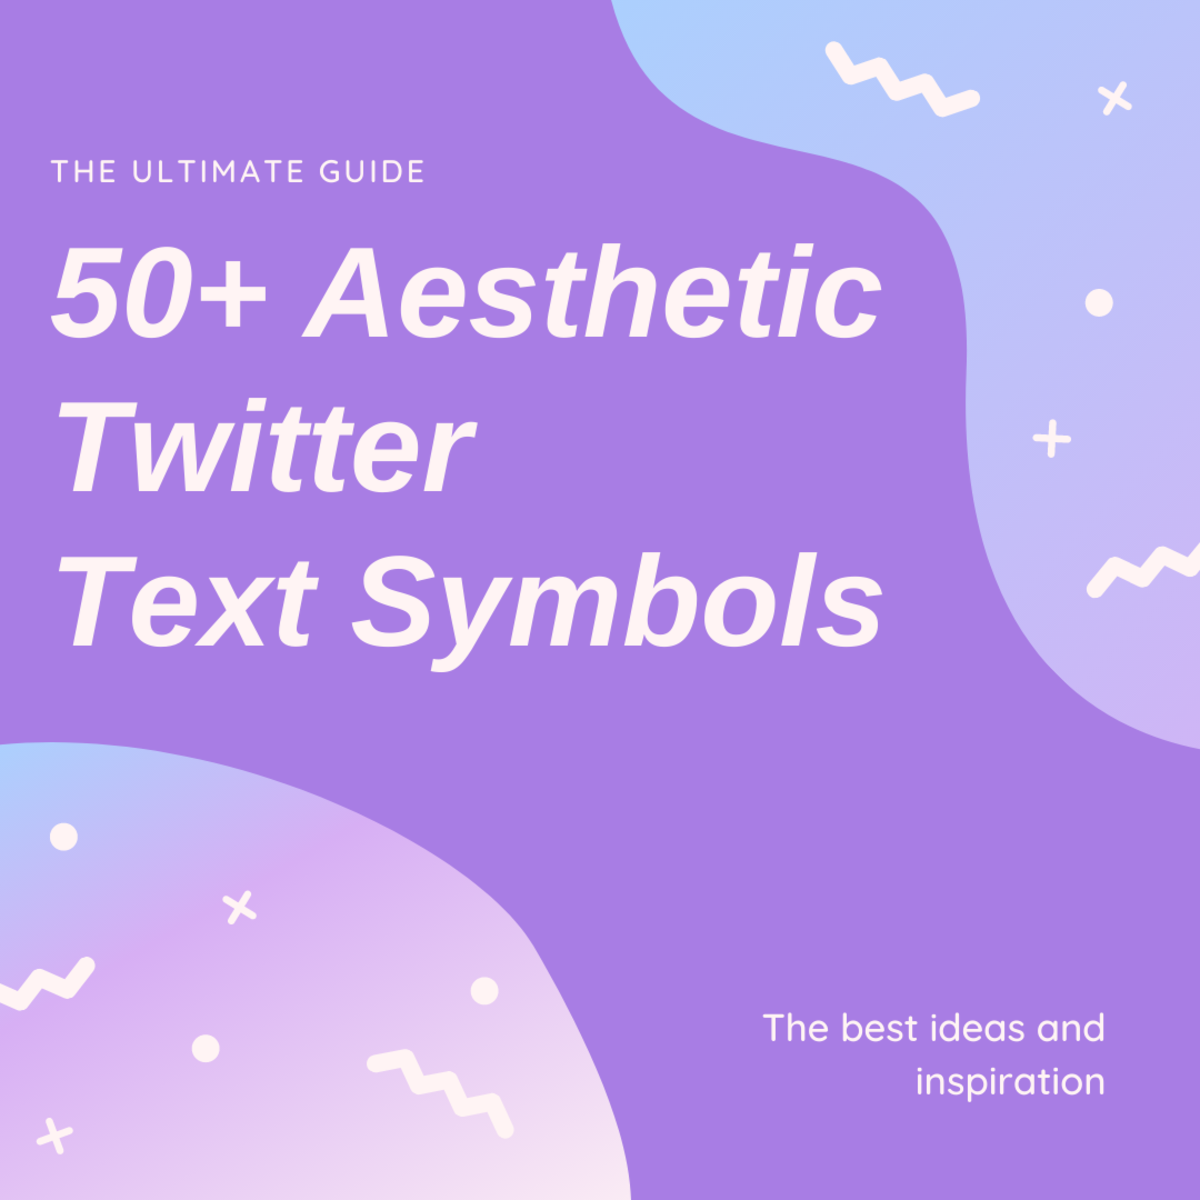 Discover over 50 aesthetic Twitter text symbols in this ultimate list!